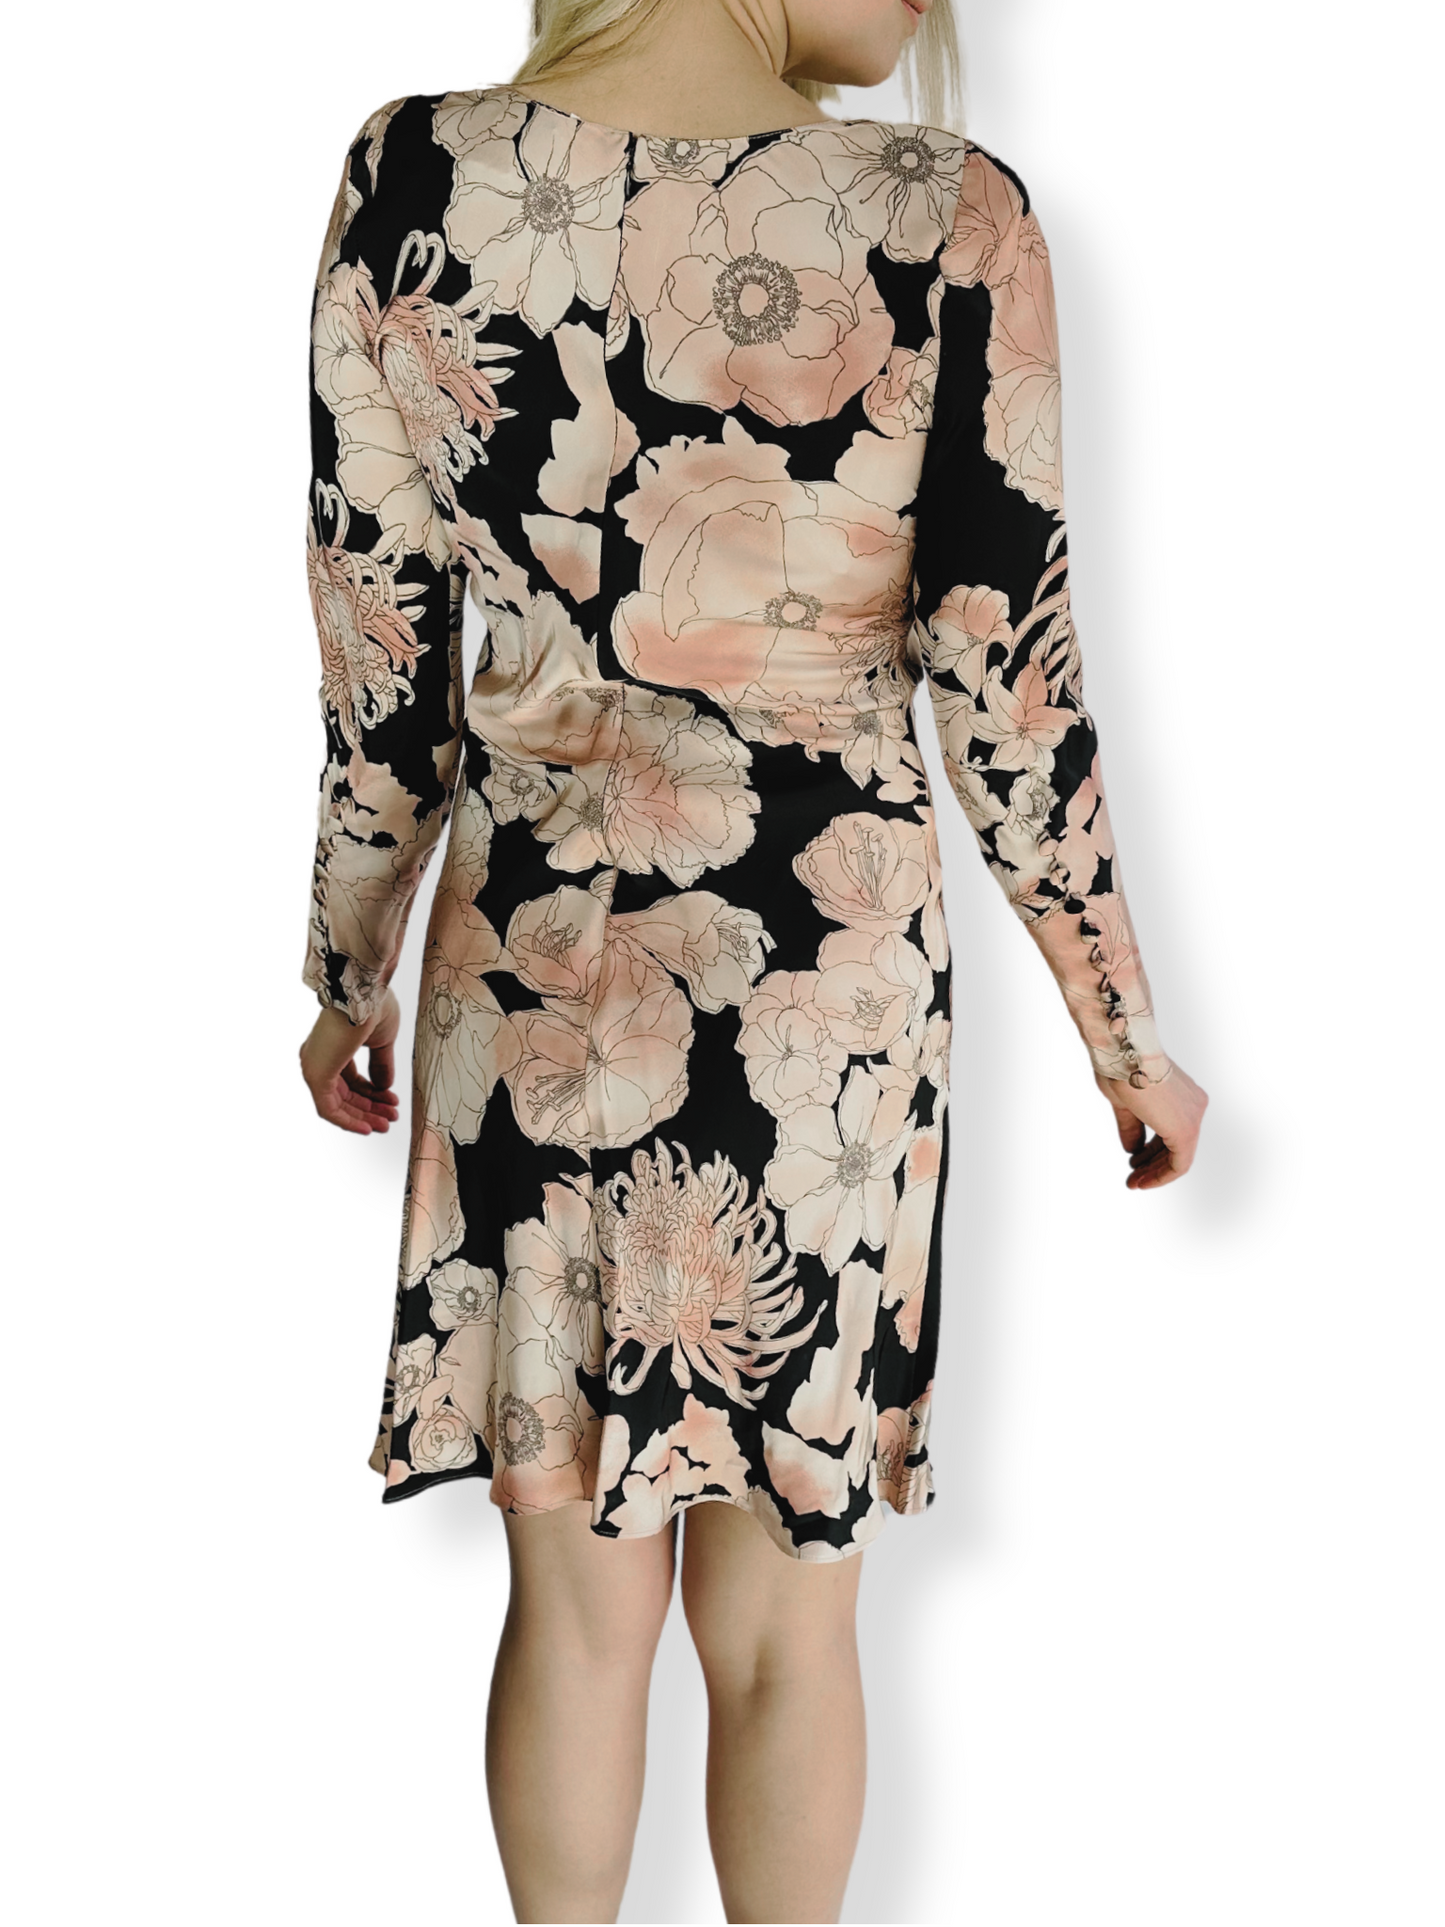 Chloe 2003 Pink and Black Floral Silk Dress Featured on Sex In The City Size 40